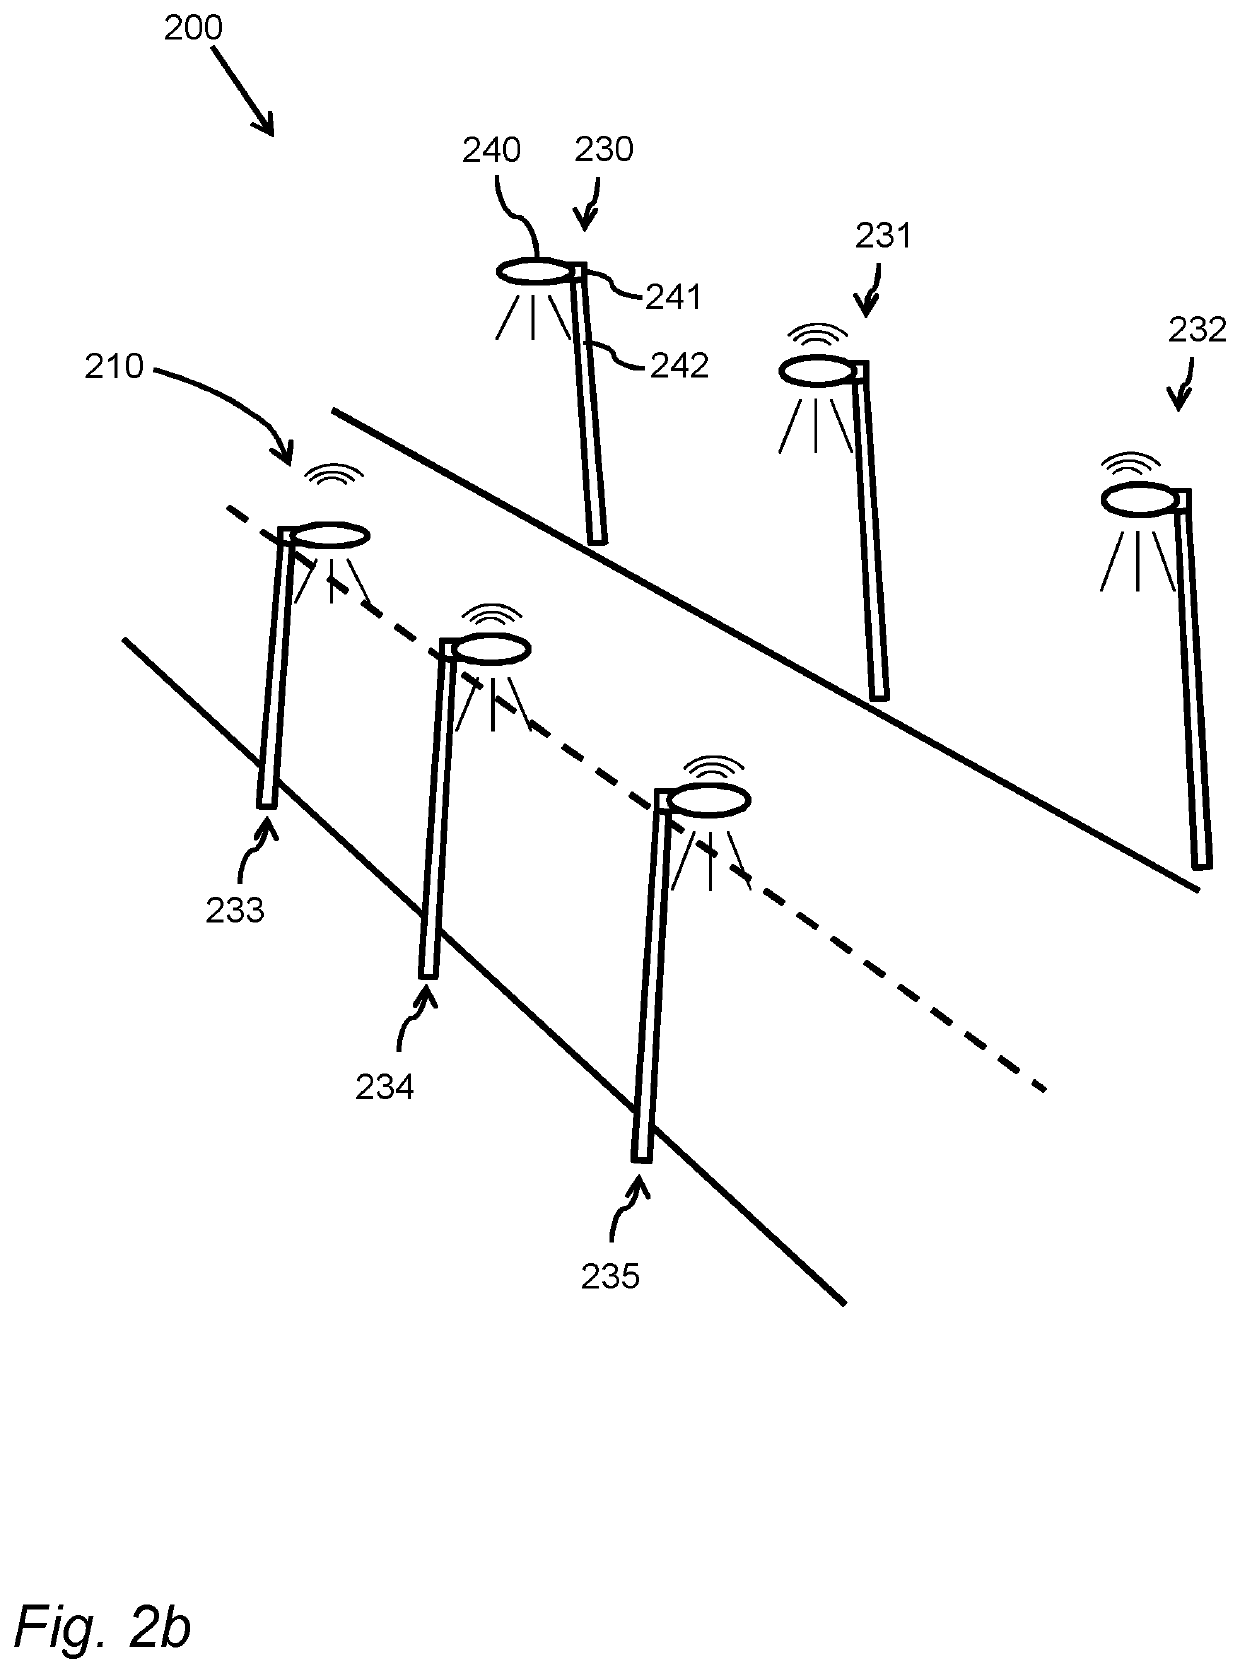 Lighting system with traffic rerouting functionality